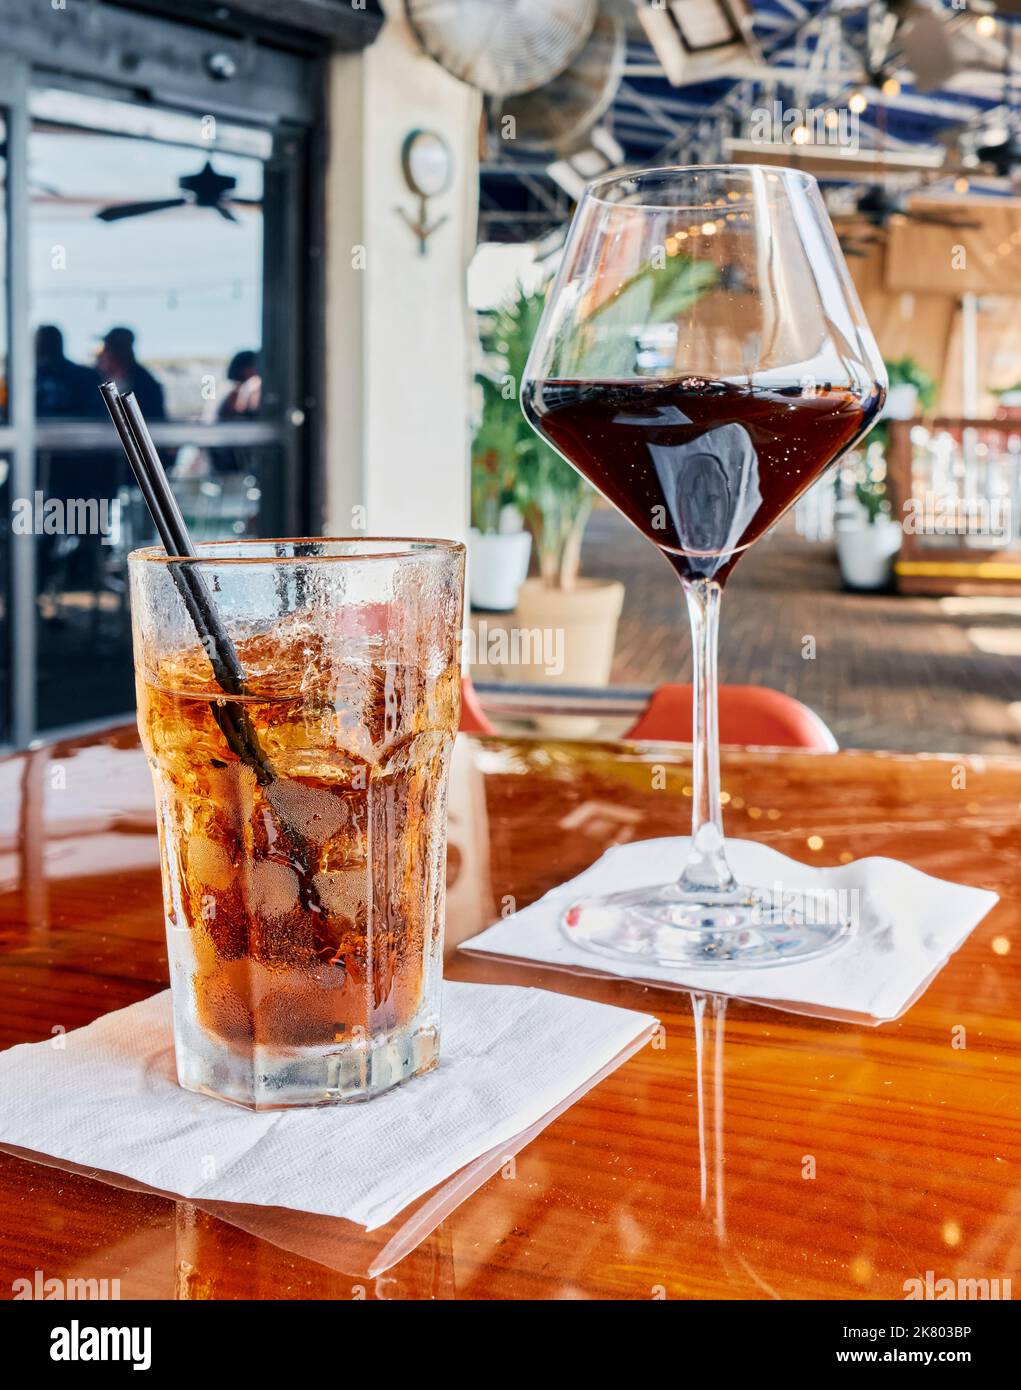 Mixed drink possibly a Bourbon and Coke or Rum and Coke along with a glass of red wine on a restaurant table in Destin Florida, USA. Stock Photo